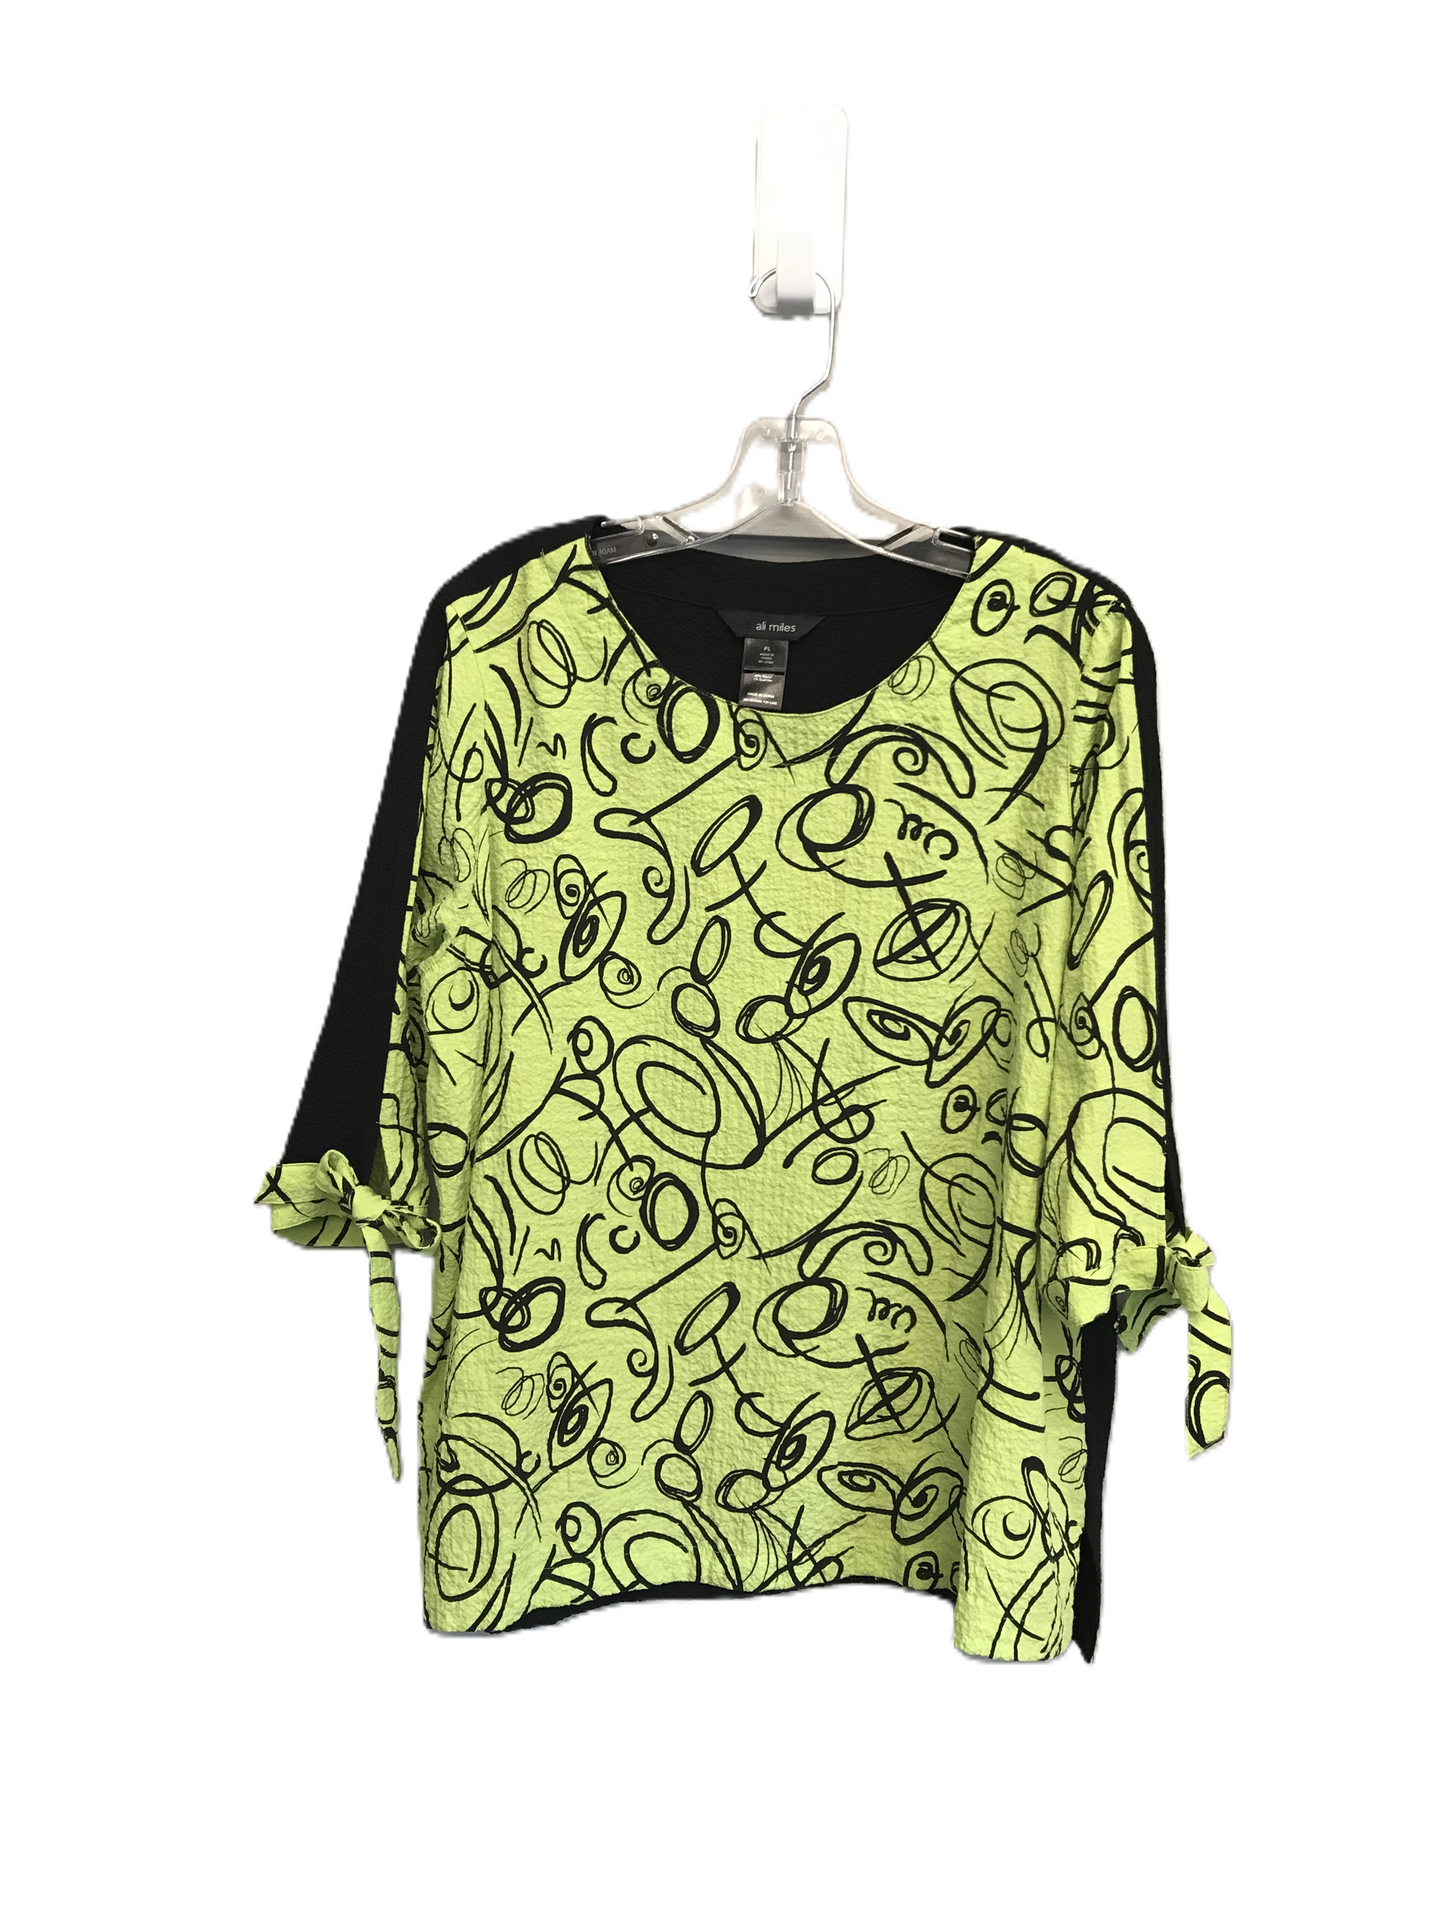 Black & Green Top 3/4 Sleeve By Ali Miles, Size: L